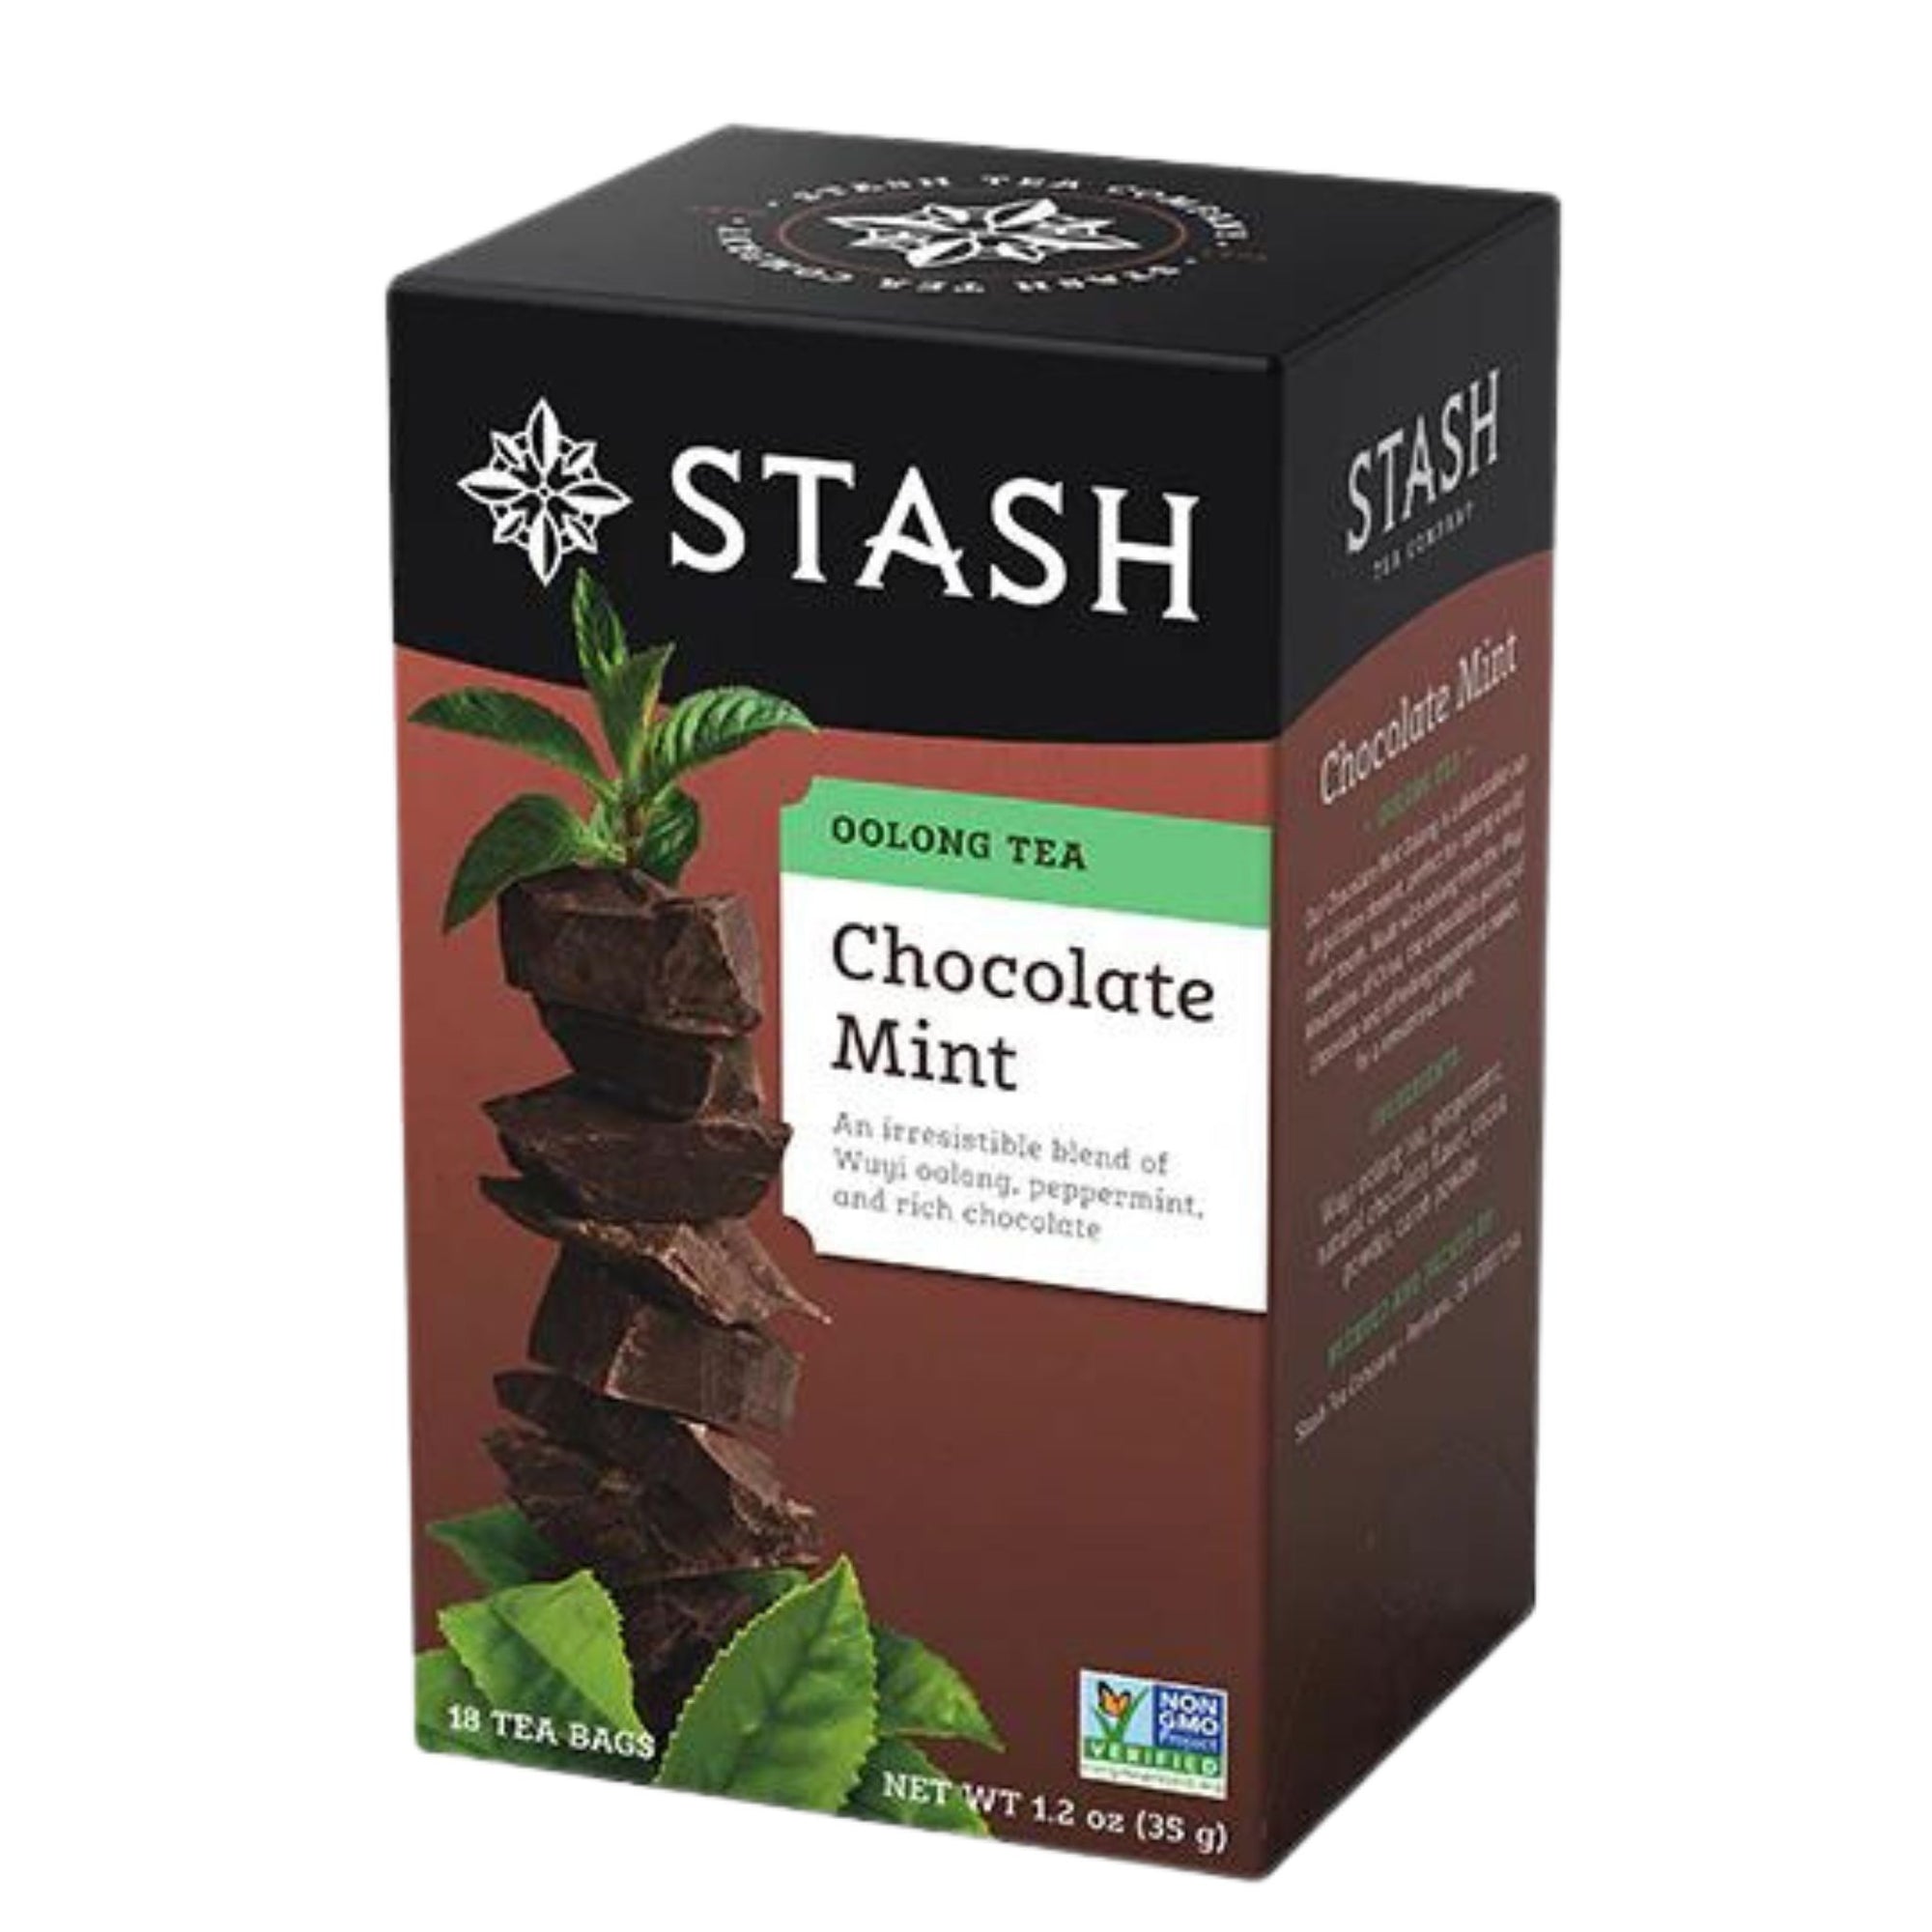 Stash Chocolate Mint Oolong Tea - 18 tea bags in a box - An irresistible blend of Wuyi oolong, peppermint, and rich chocolate. 